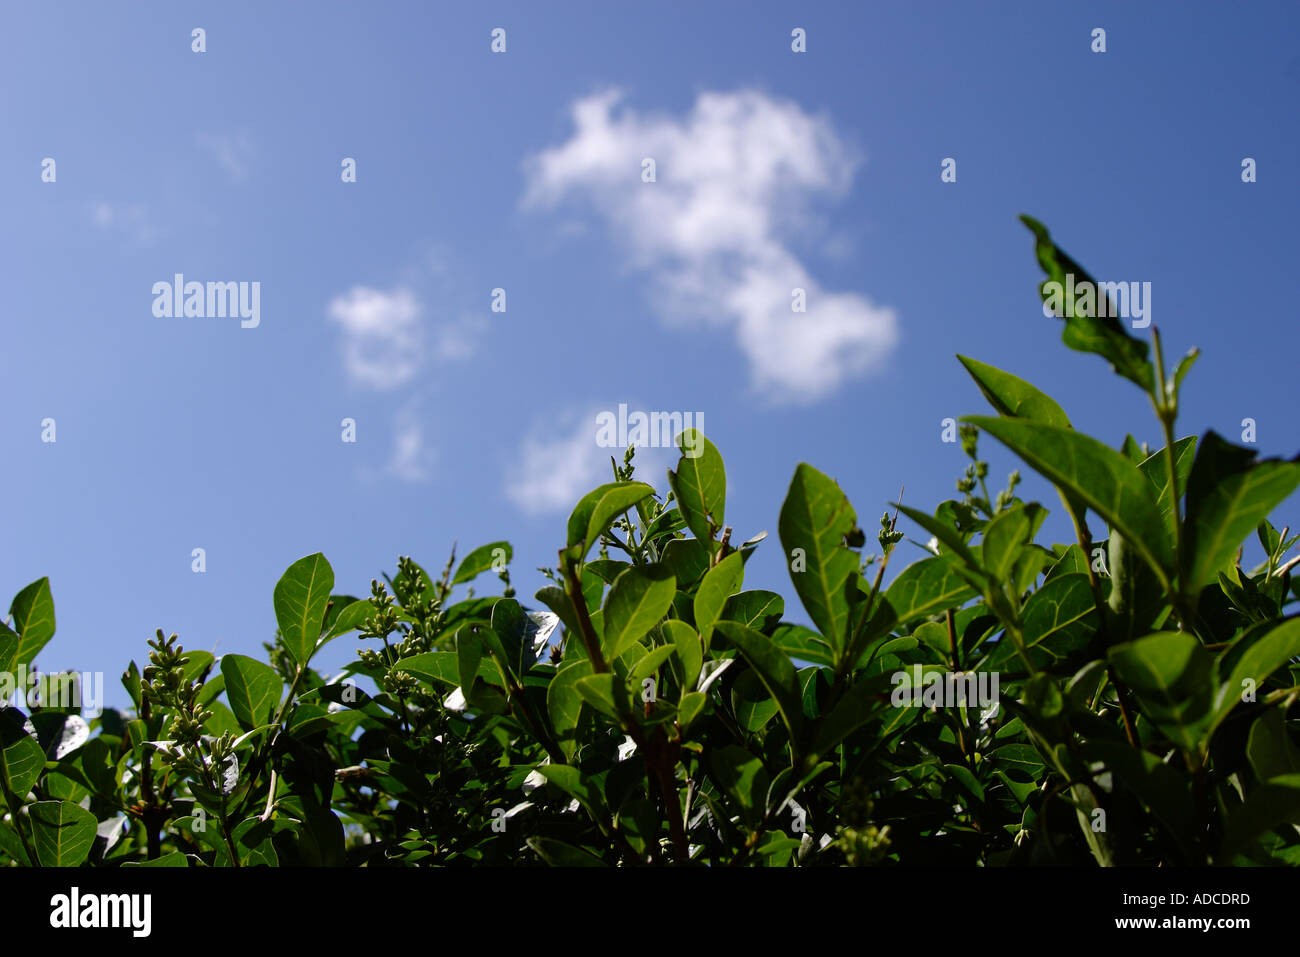 portrait image of green privet hedge with blue sky with small white cloud shot in strong sunlight shot on 21st June 2006 Stock Photo